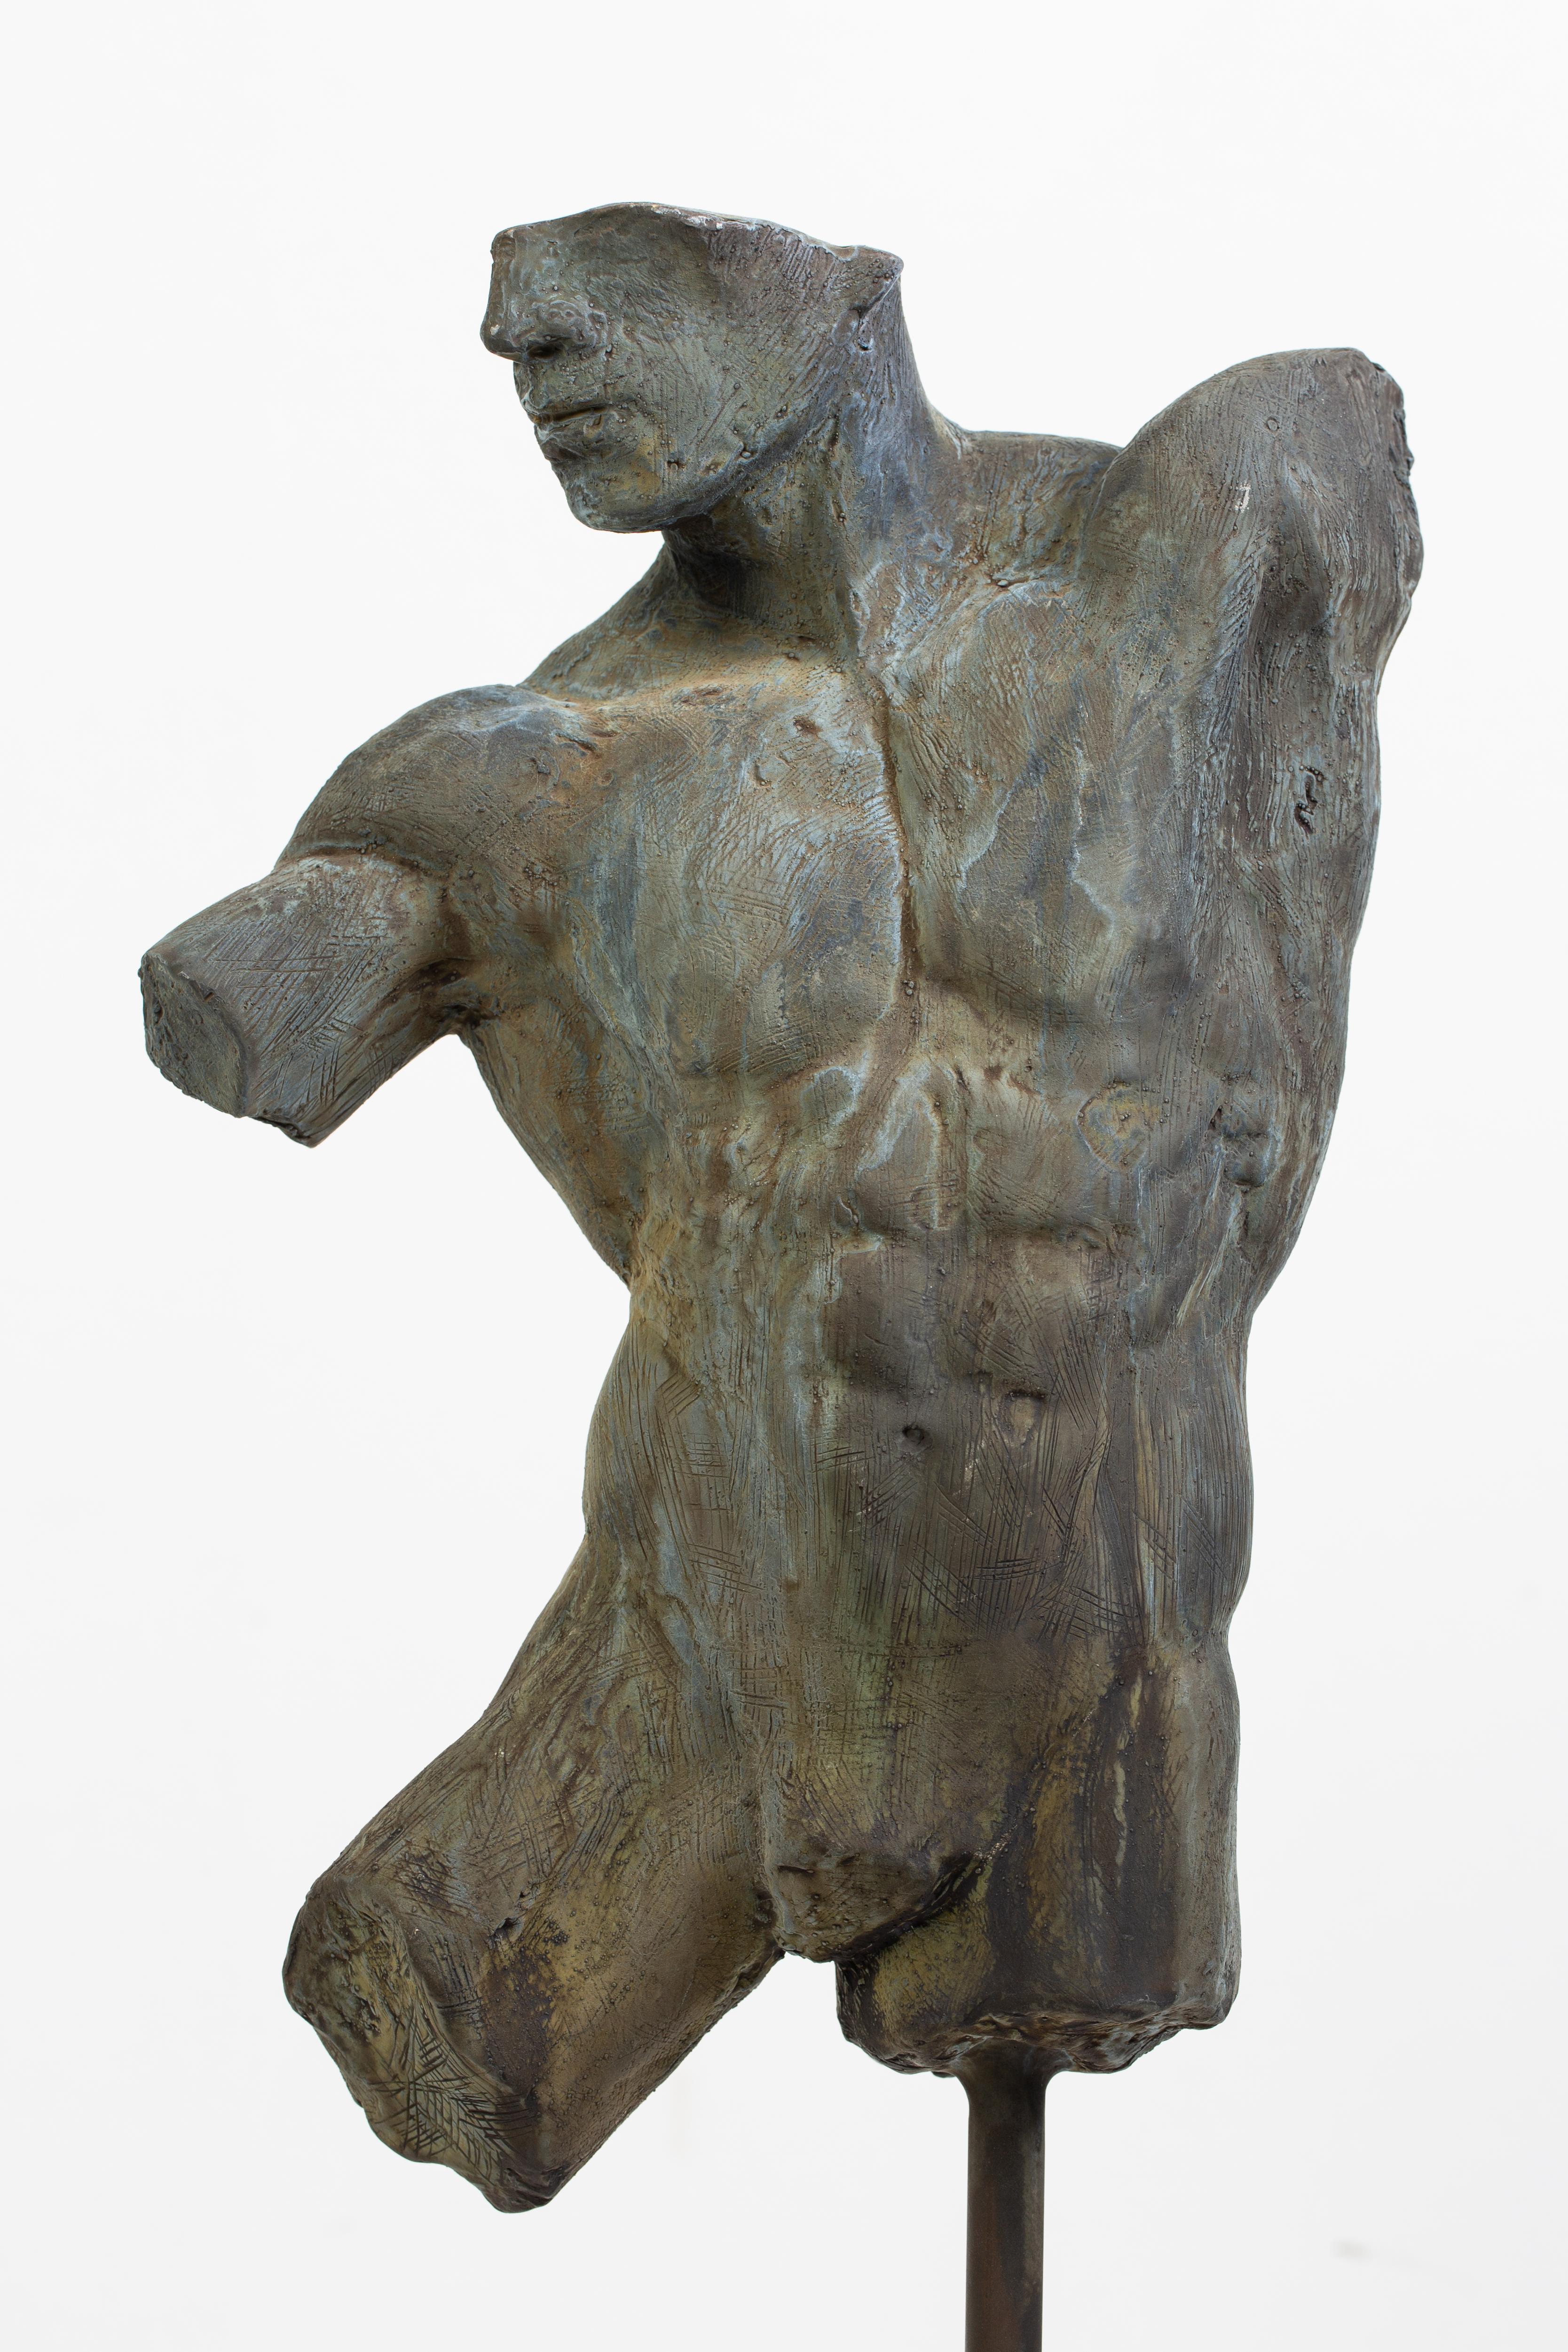 This is an extraordinary bronze sculpture of a Classic male nude fragment by artist Dean Kugler with a verdigris patina. Attention to detail and complete understanding of the human figure are evident. The sculpture is beautifully custom mounted on a